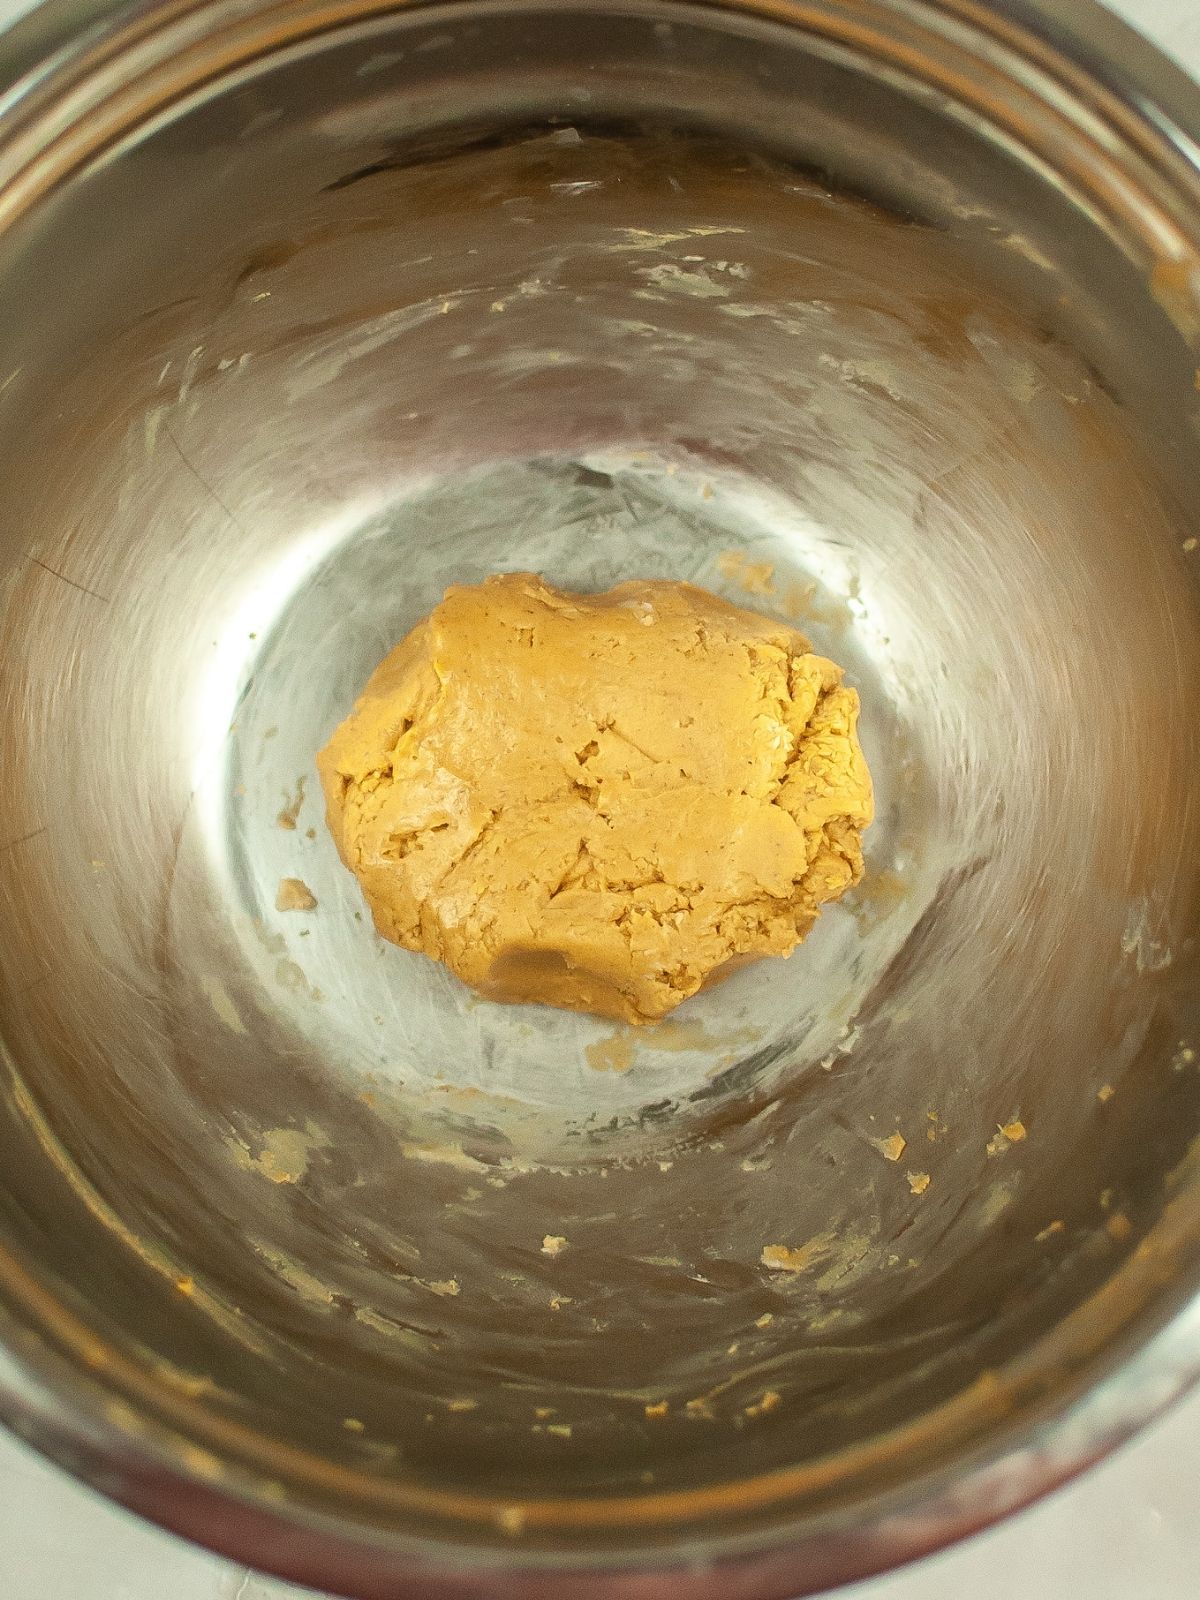 peanut butter filling combined in bowl.